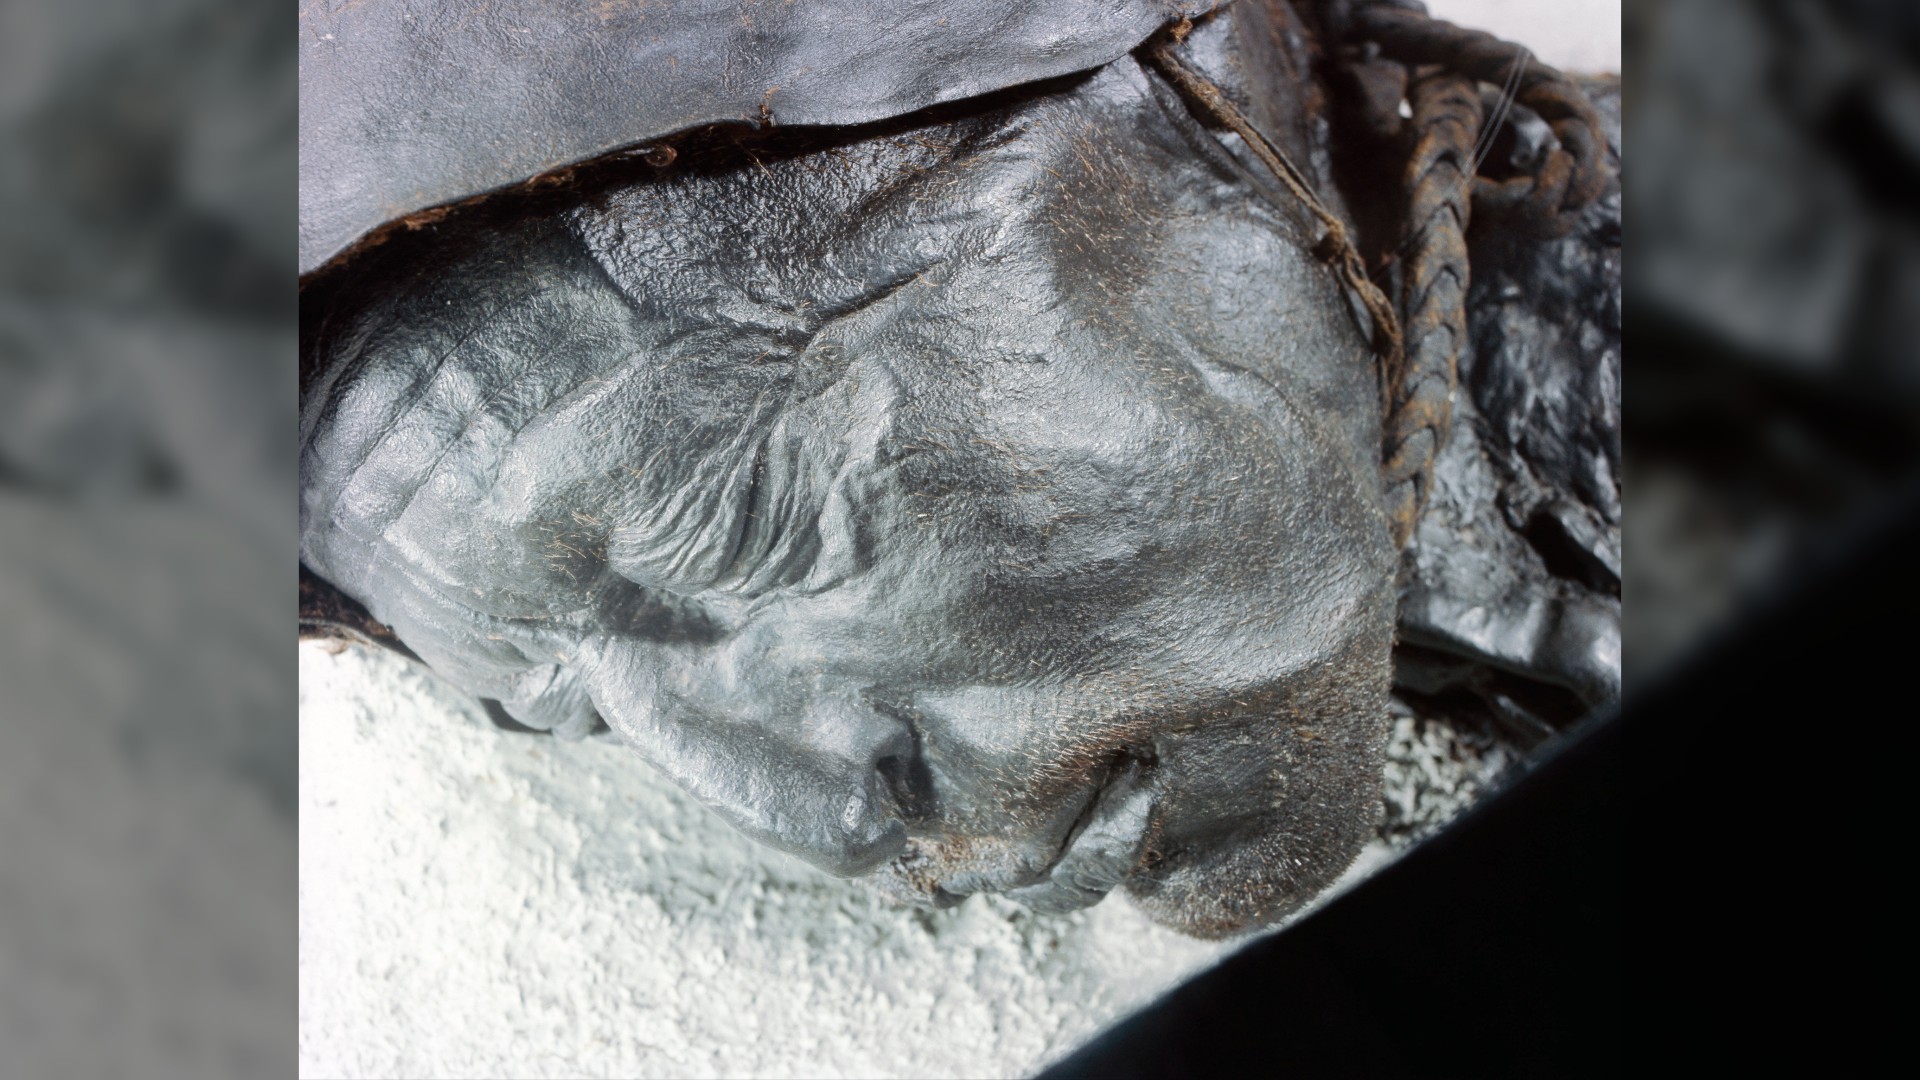 Close up of the mummified Tollund man's face.